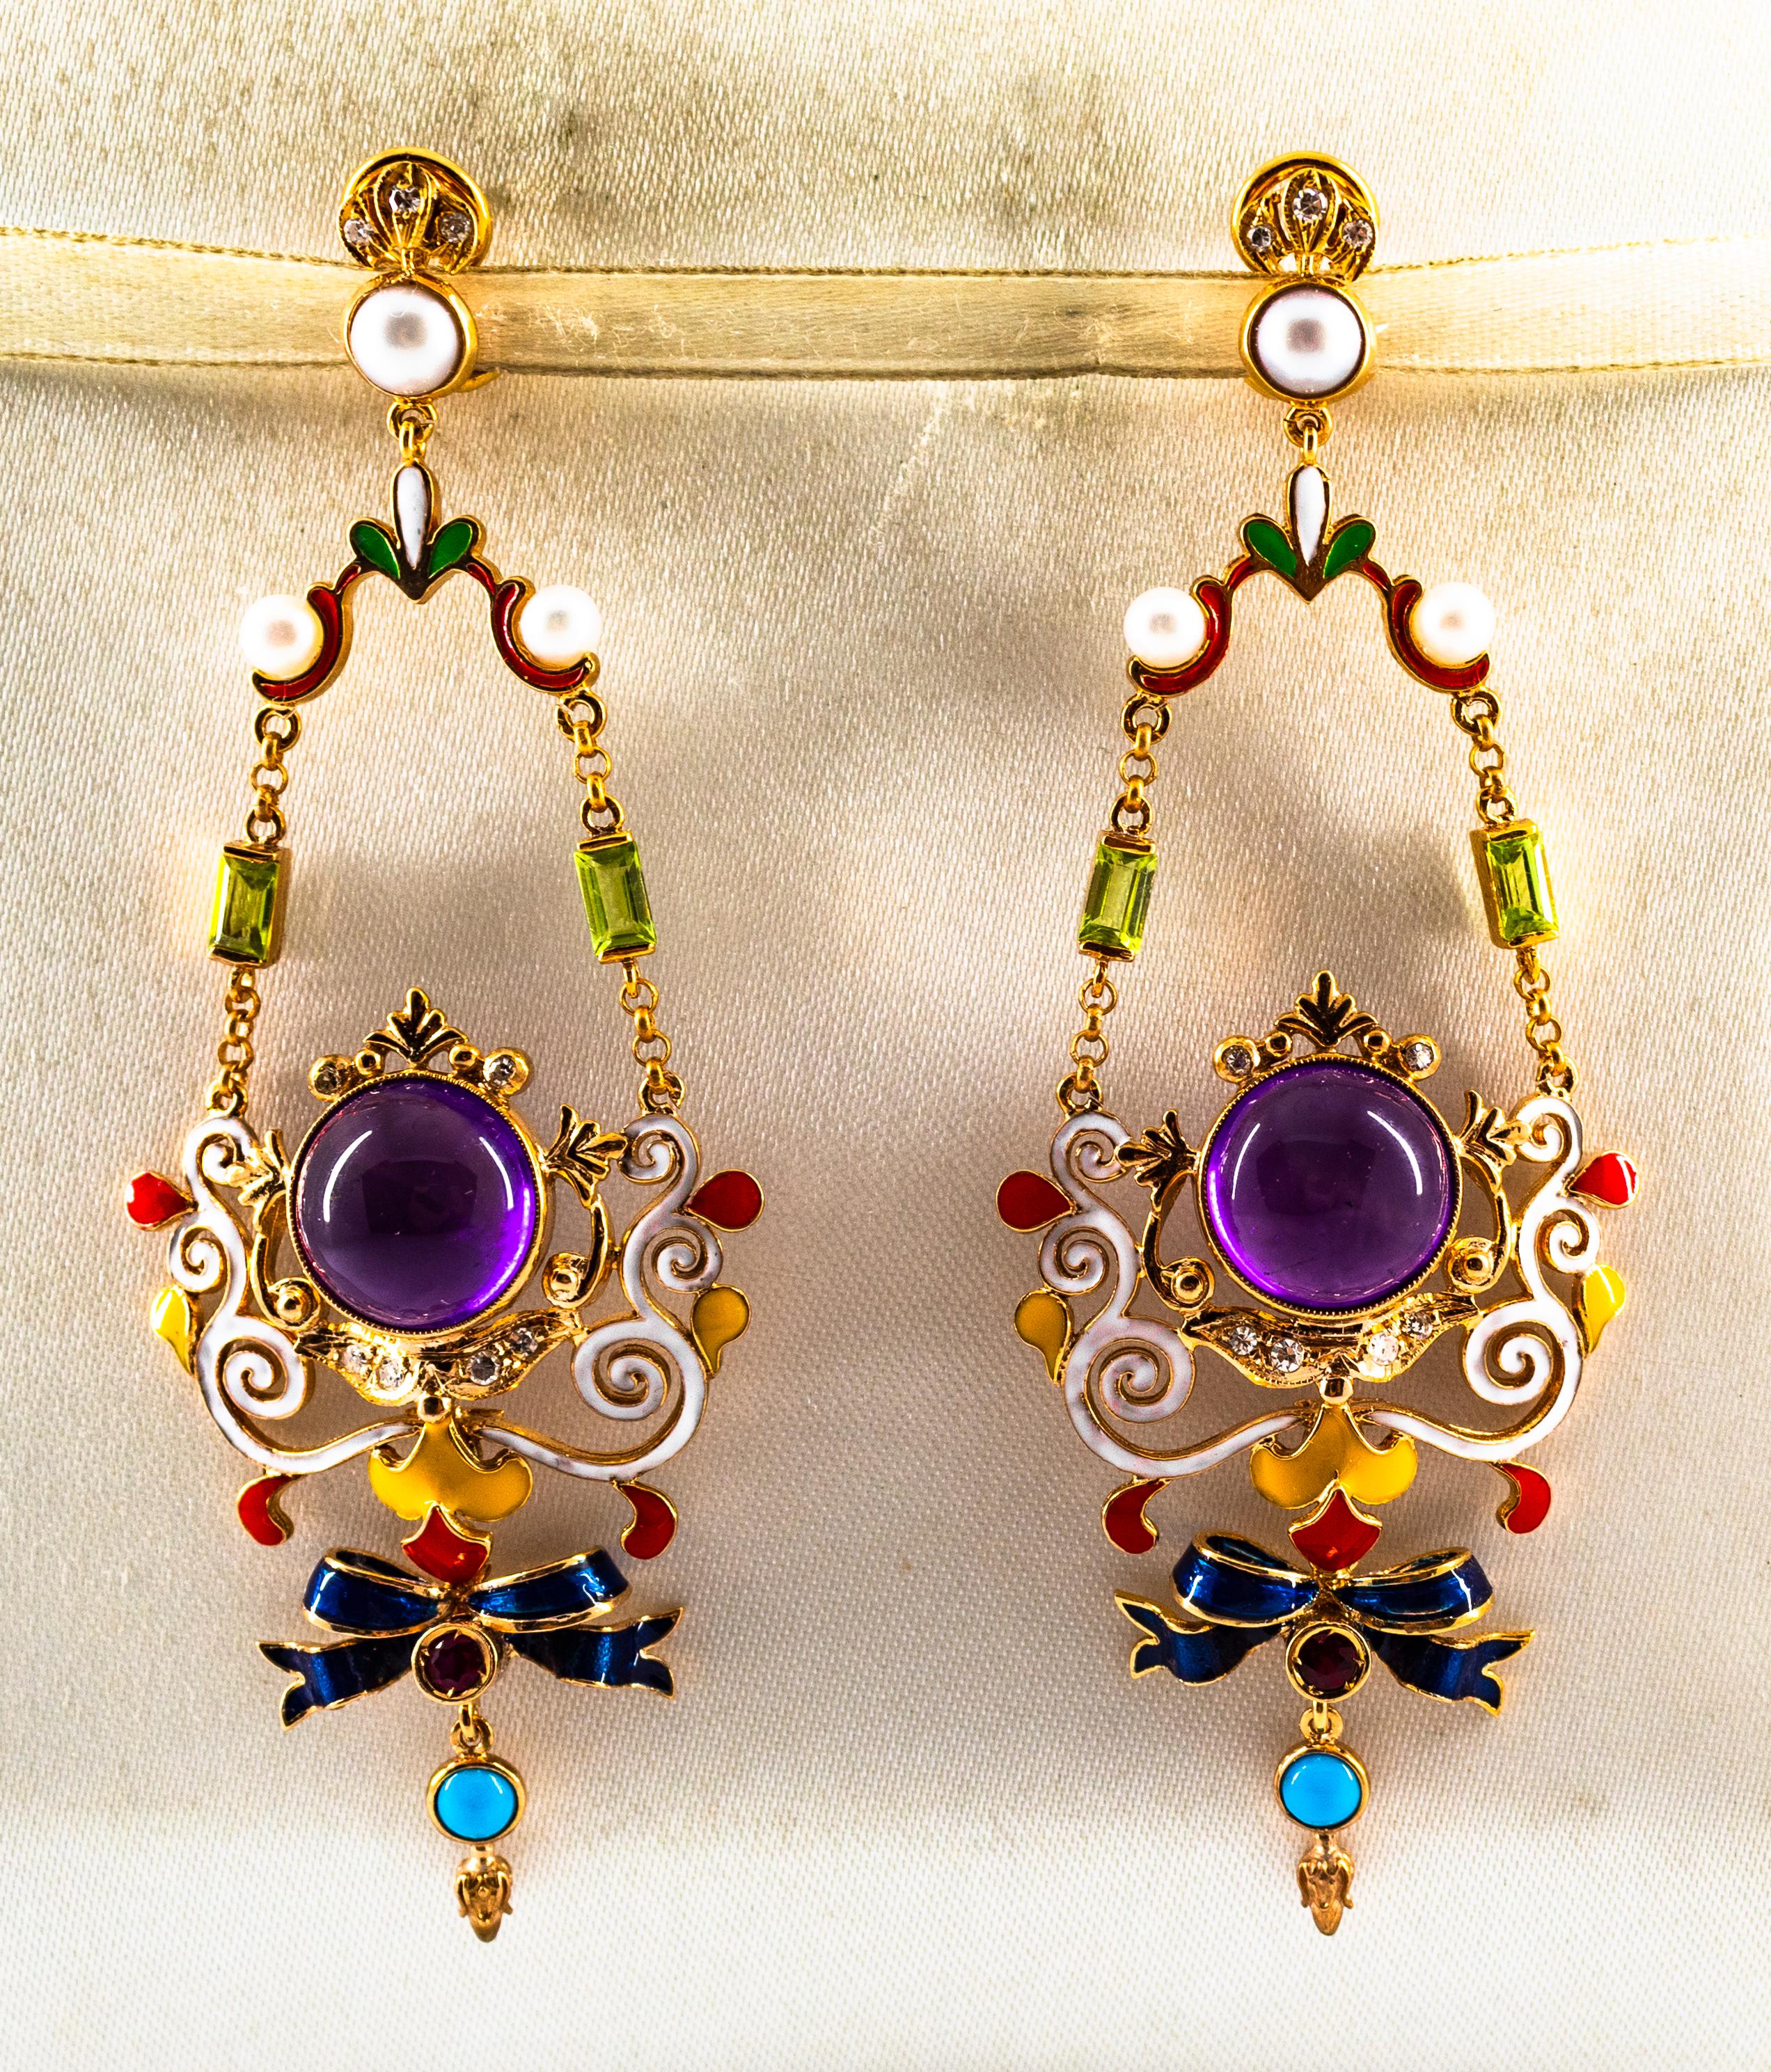 These Earrings are made of 9K Yellow Gold.
These Earrings have  0.30 Carats of White Modern Round Cut Diamonds.
These Earrings have 0.20 Carats of Rubies.
These Earrings have 0.40 Carats of Peridots.
These Earrings have Amethyst and Turquoise.
These